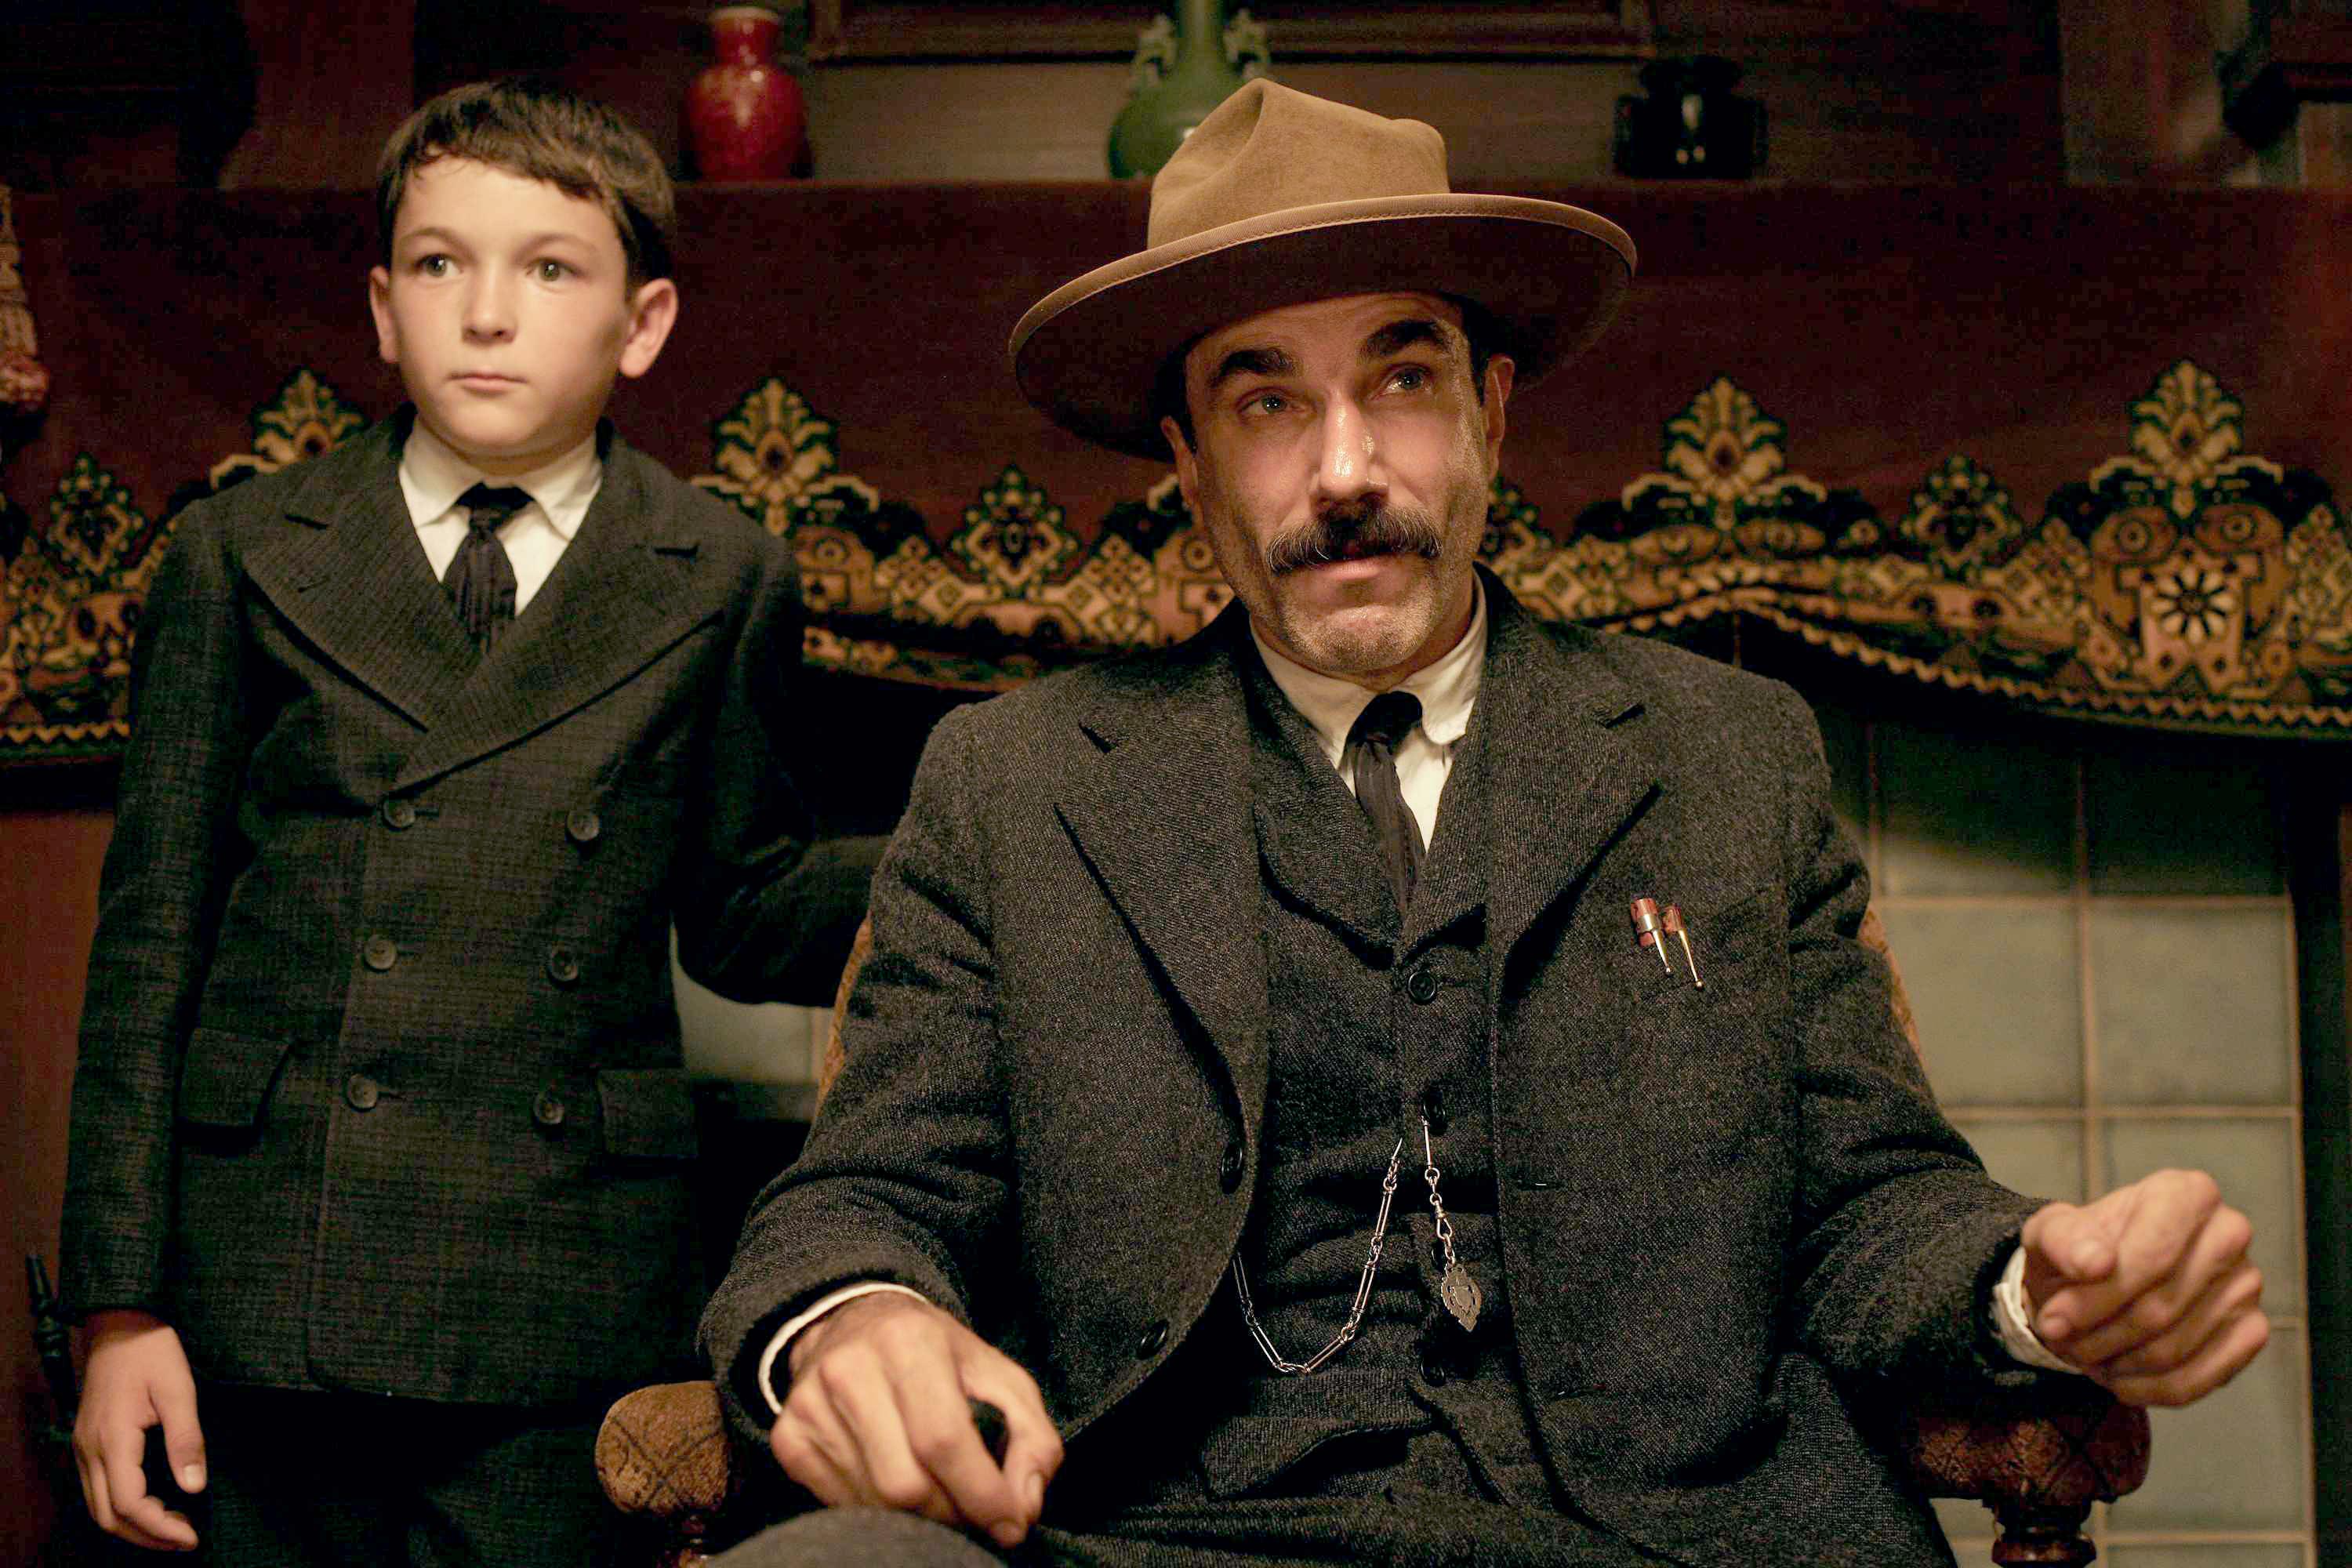 Dillon Freasier as HW Plainview and Daniel Day-Lewis as Daniel Plainview in a conversation with someone else in There Will Be Blood